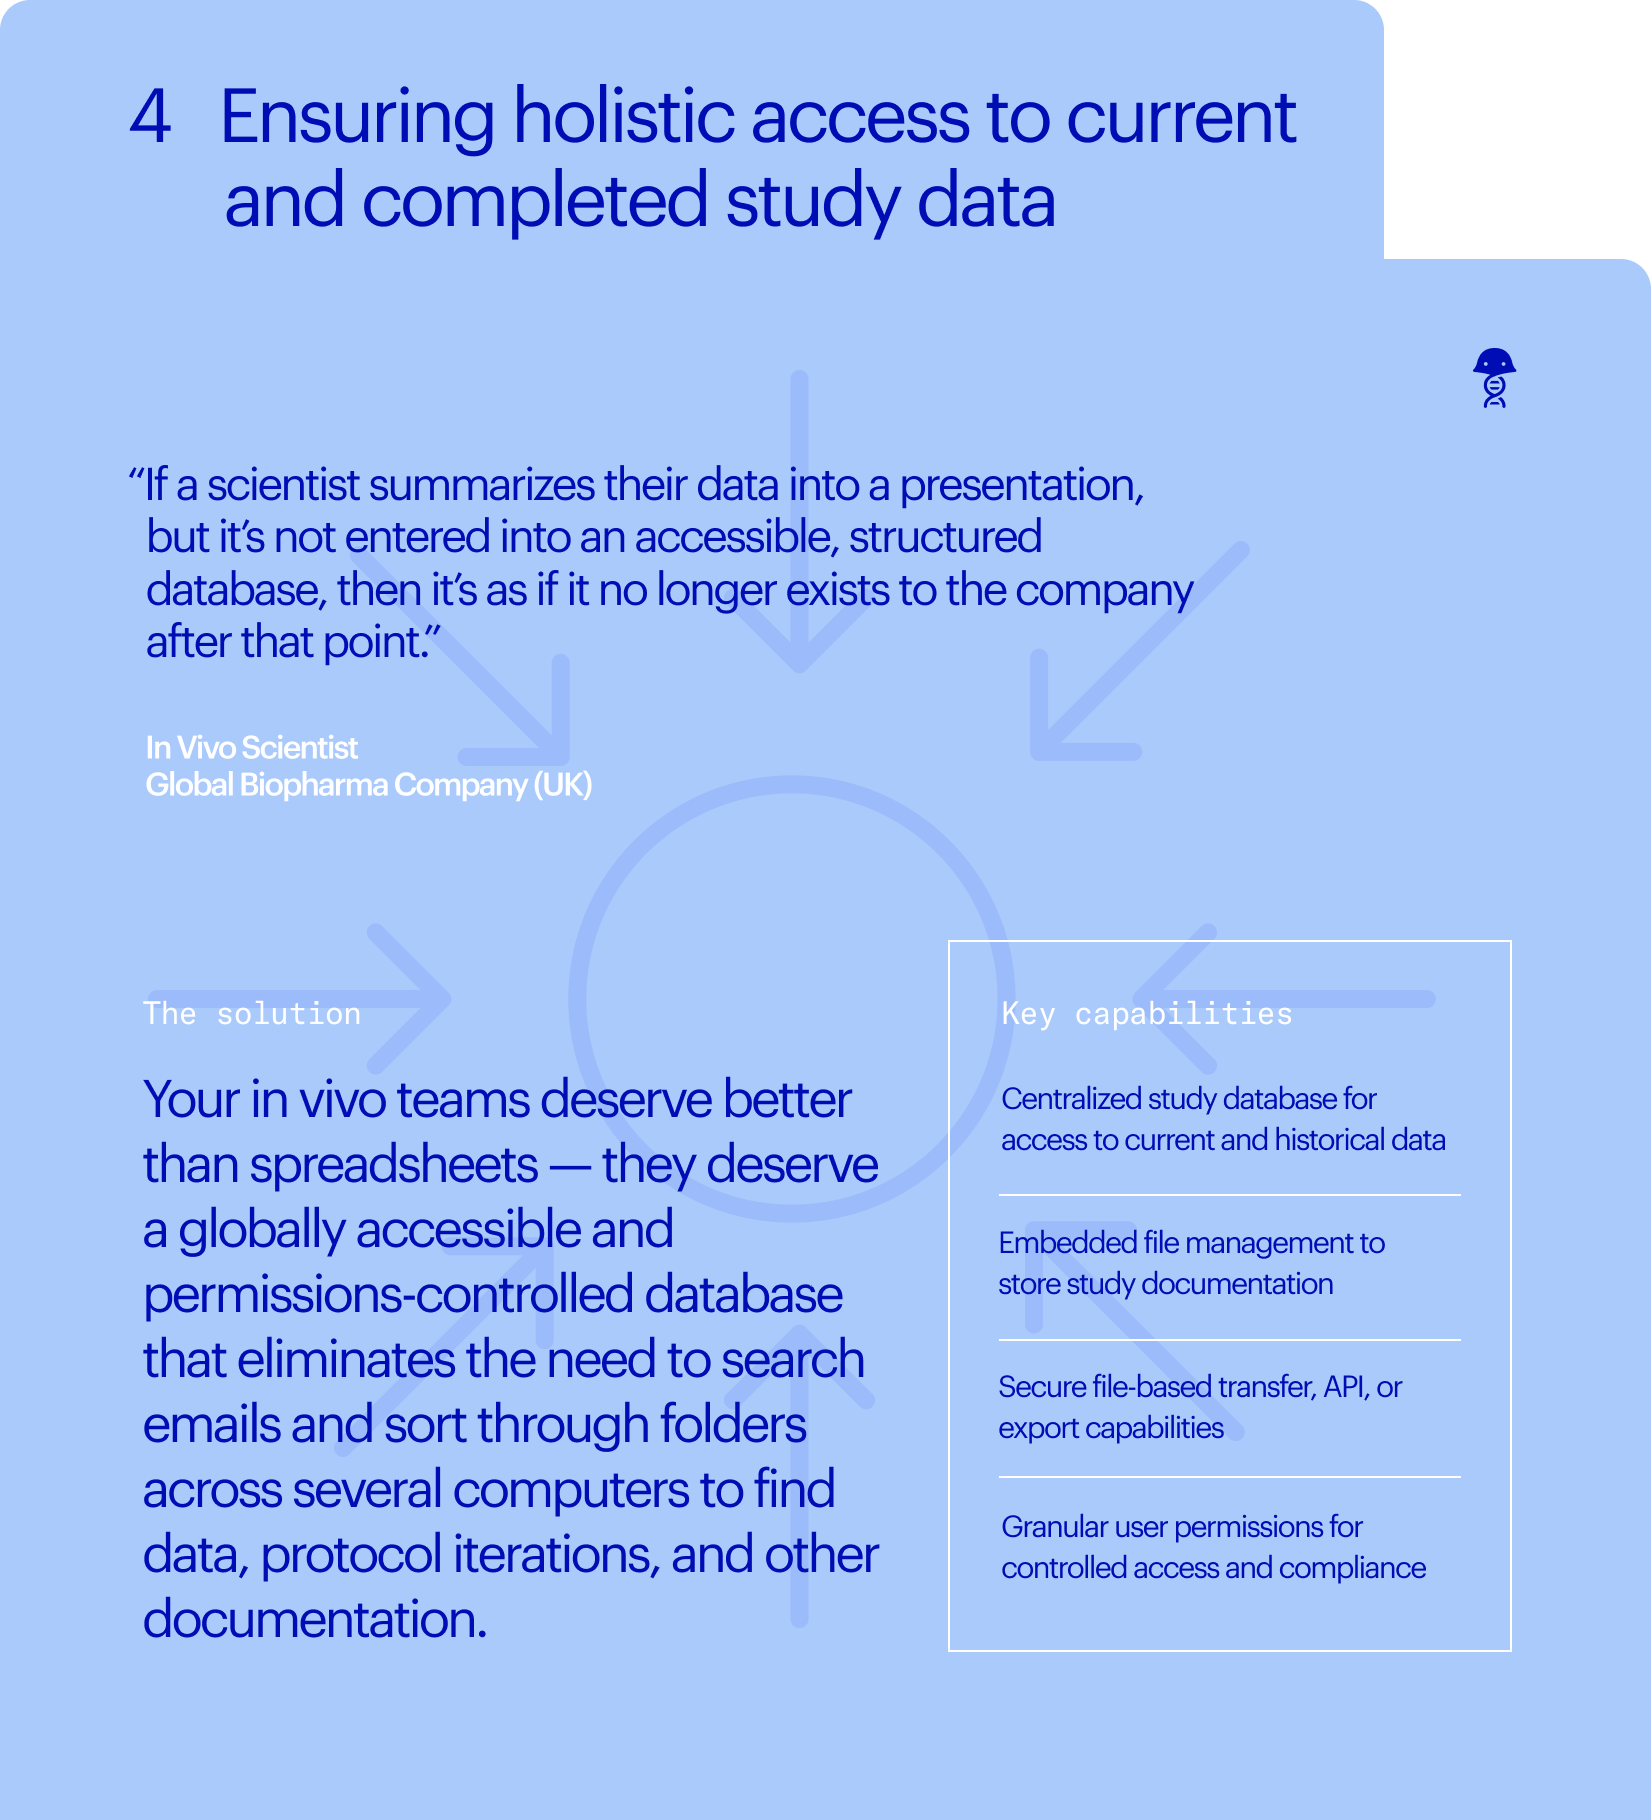 studies-infographic-4-ensuring-holistic-access-to-current-and-completed-study-data